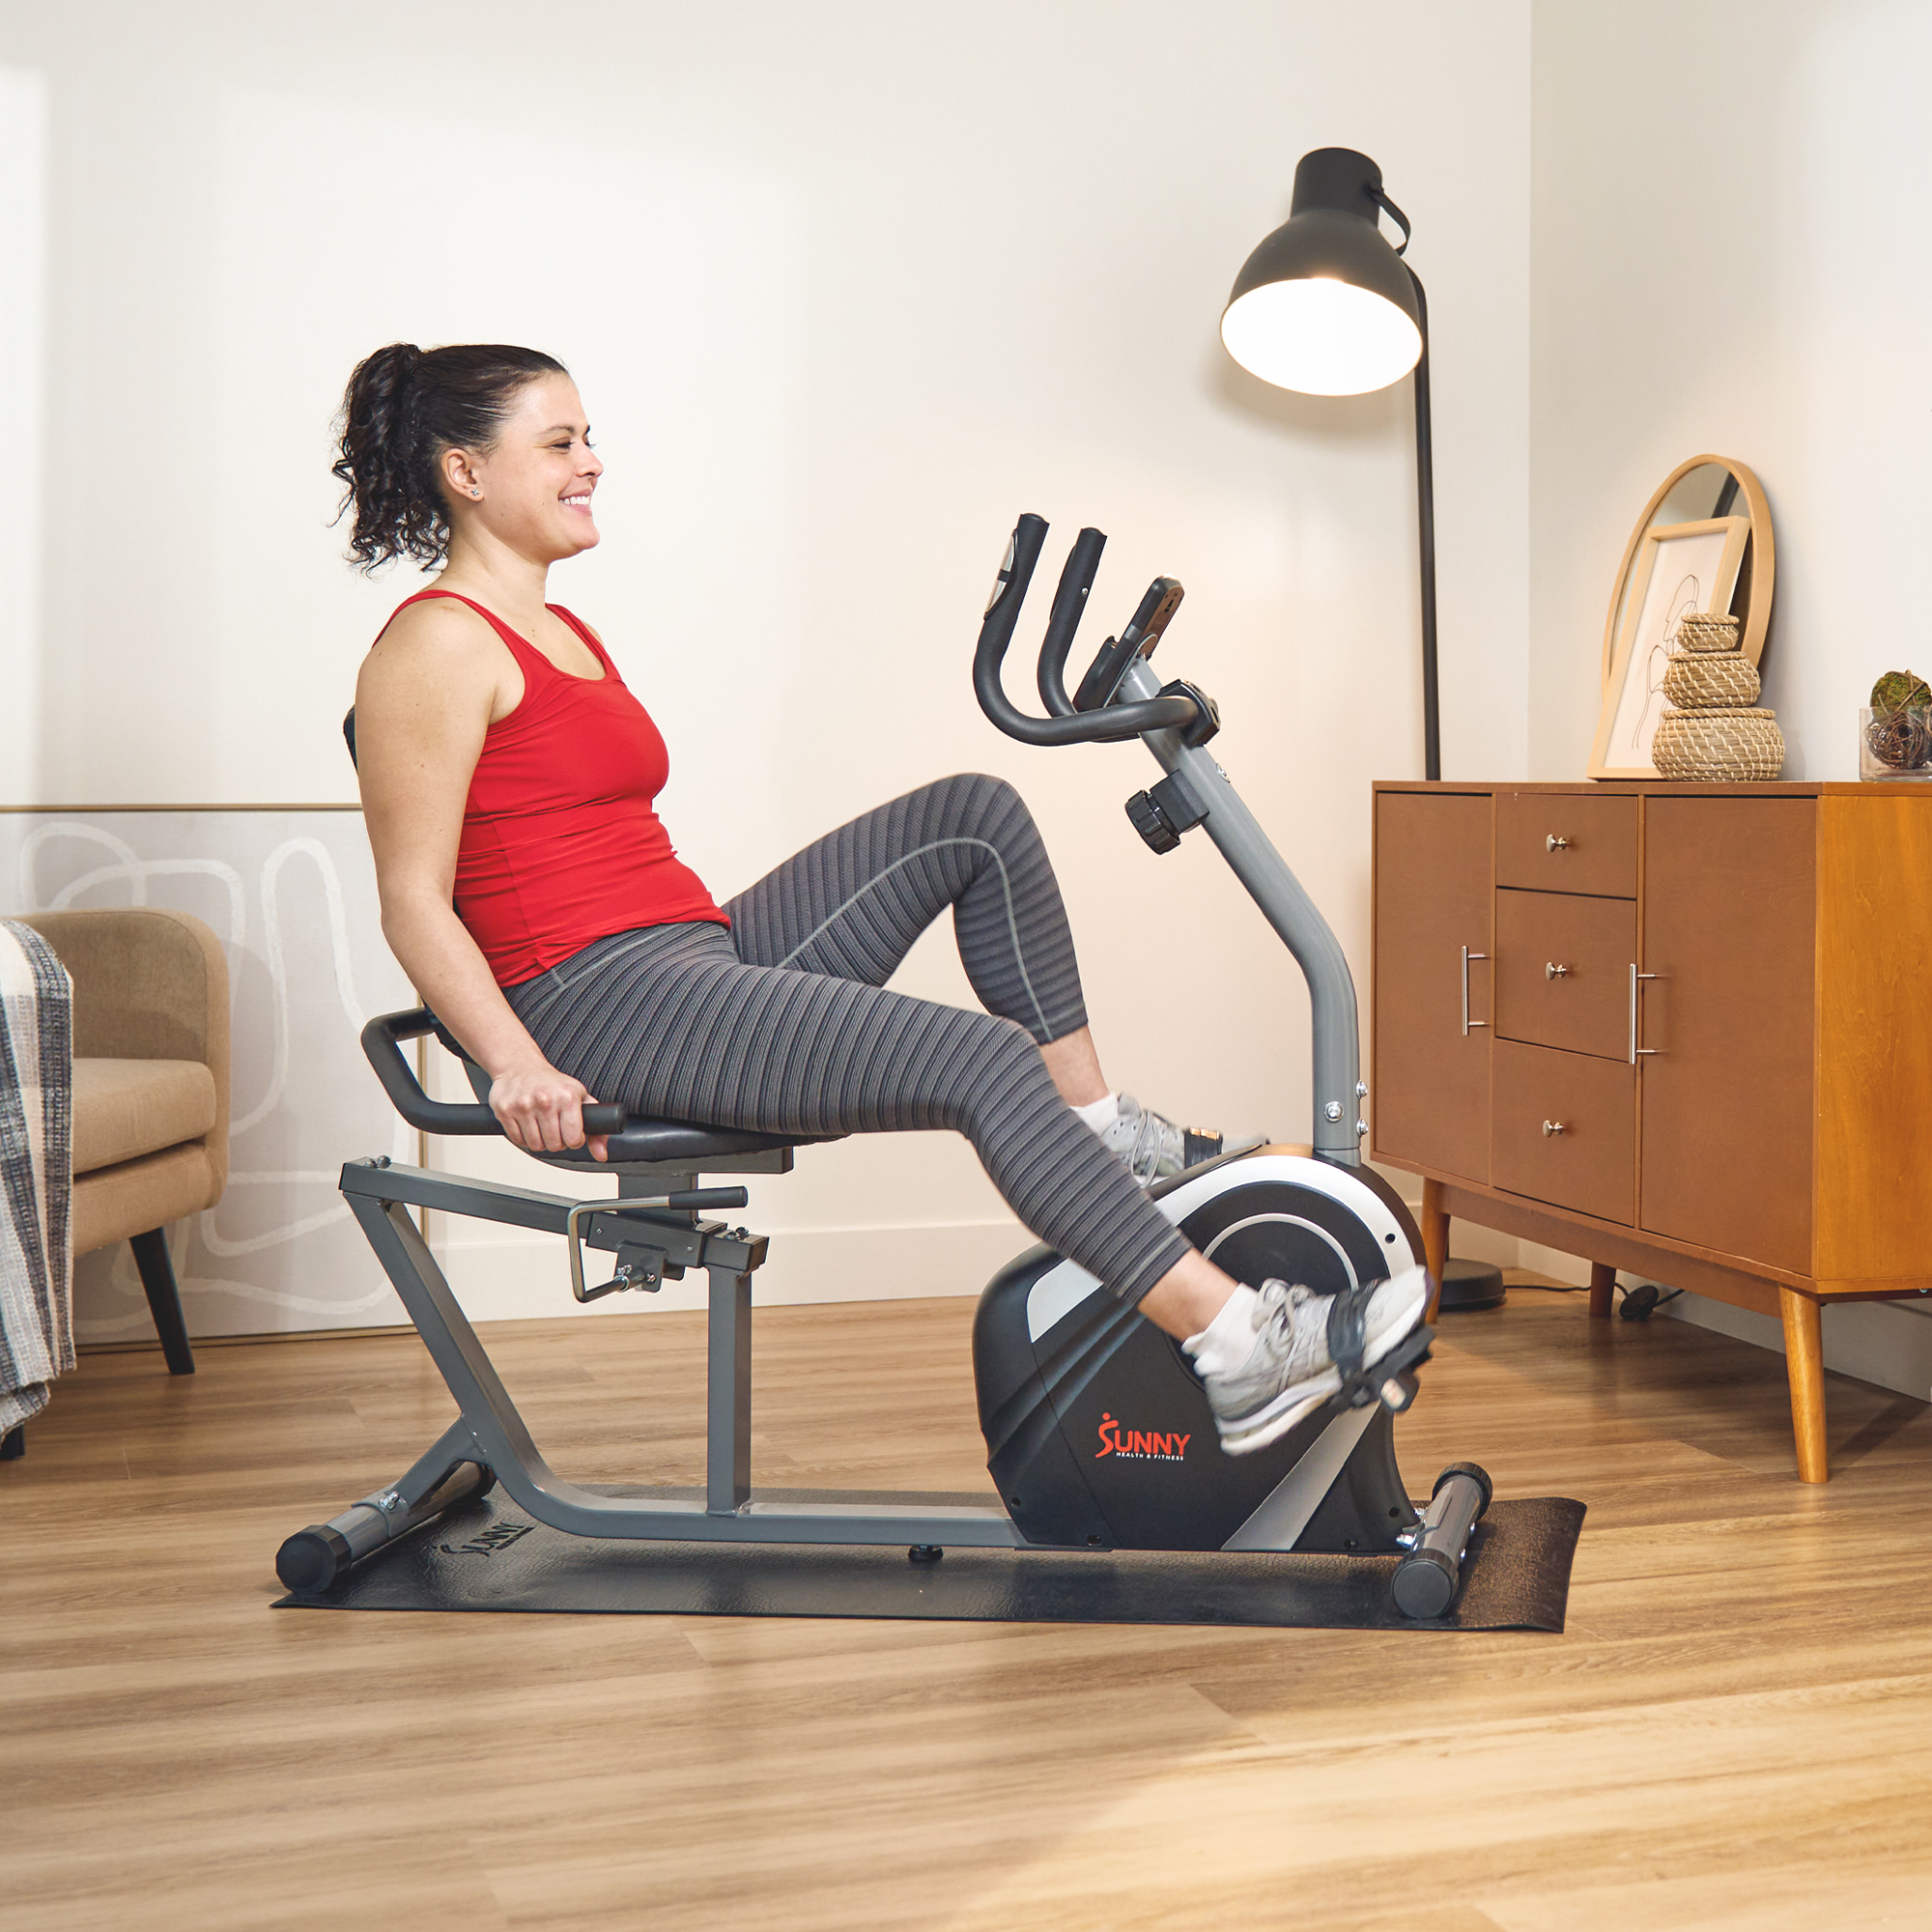 Sunny Health & Fitness Magnetic Recumbent Bike Exercise Bike, 300lb Capacity, Easy Adjustable Seat, Monitor, Pulse Rate Monitoring - SF-RB4616S - image 5 of 5